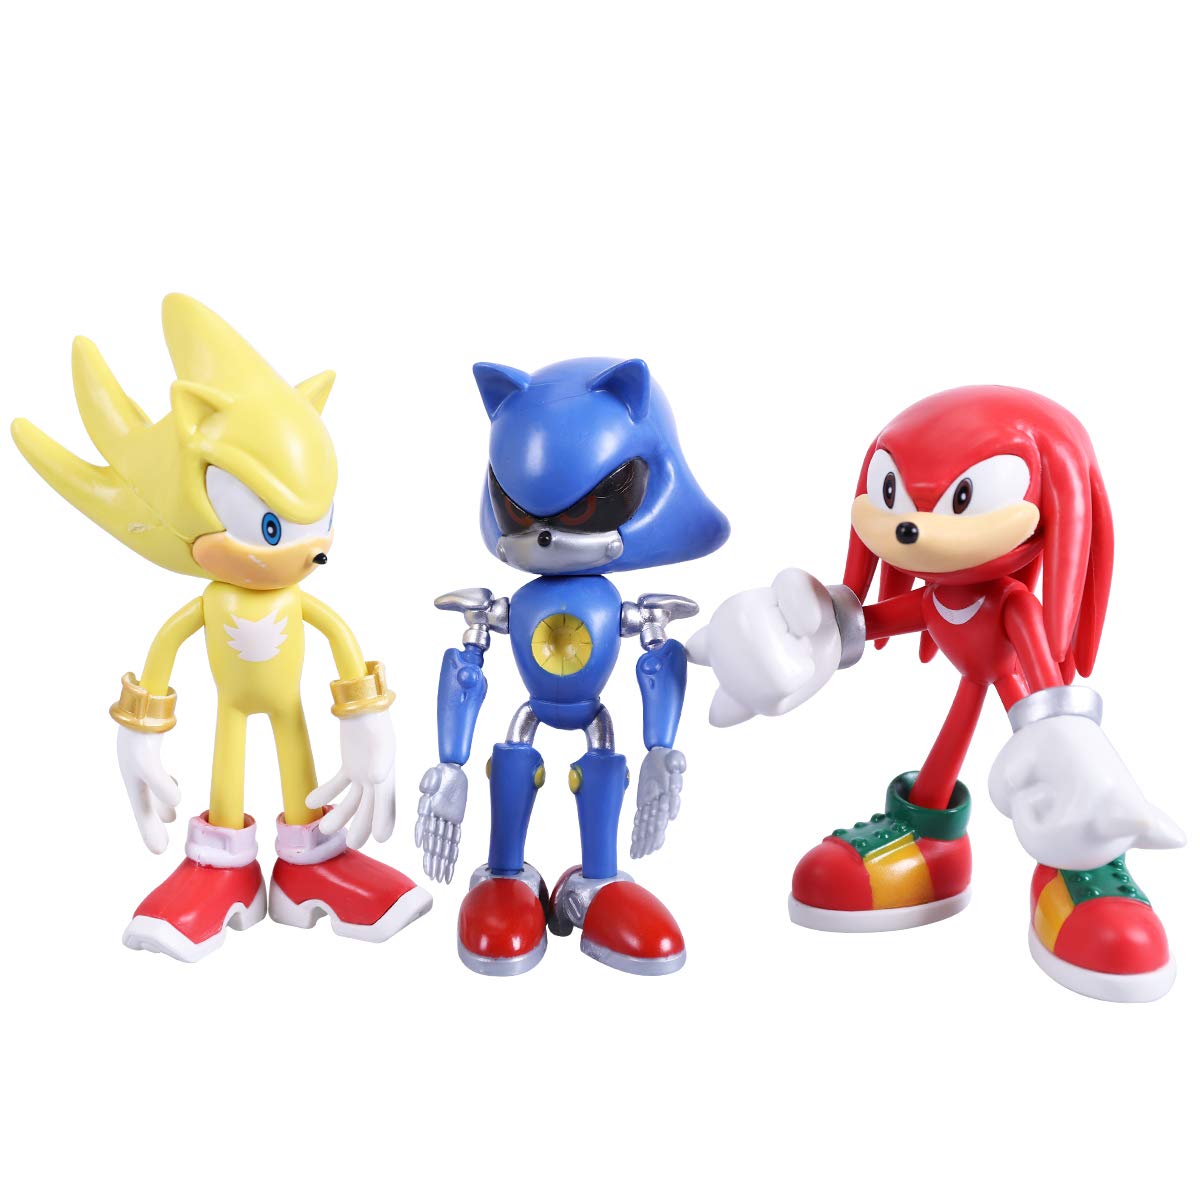 Max Fun Sonic The Hedgehog Action Figures with Movable Joint Playsets Toys, 4.7'' Tall Cake Toppers Kids Gift (Pack of 5)